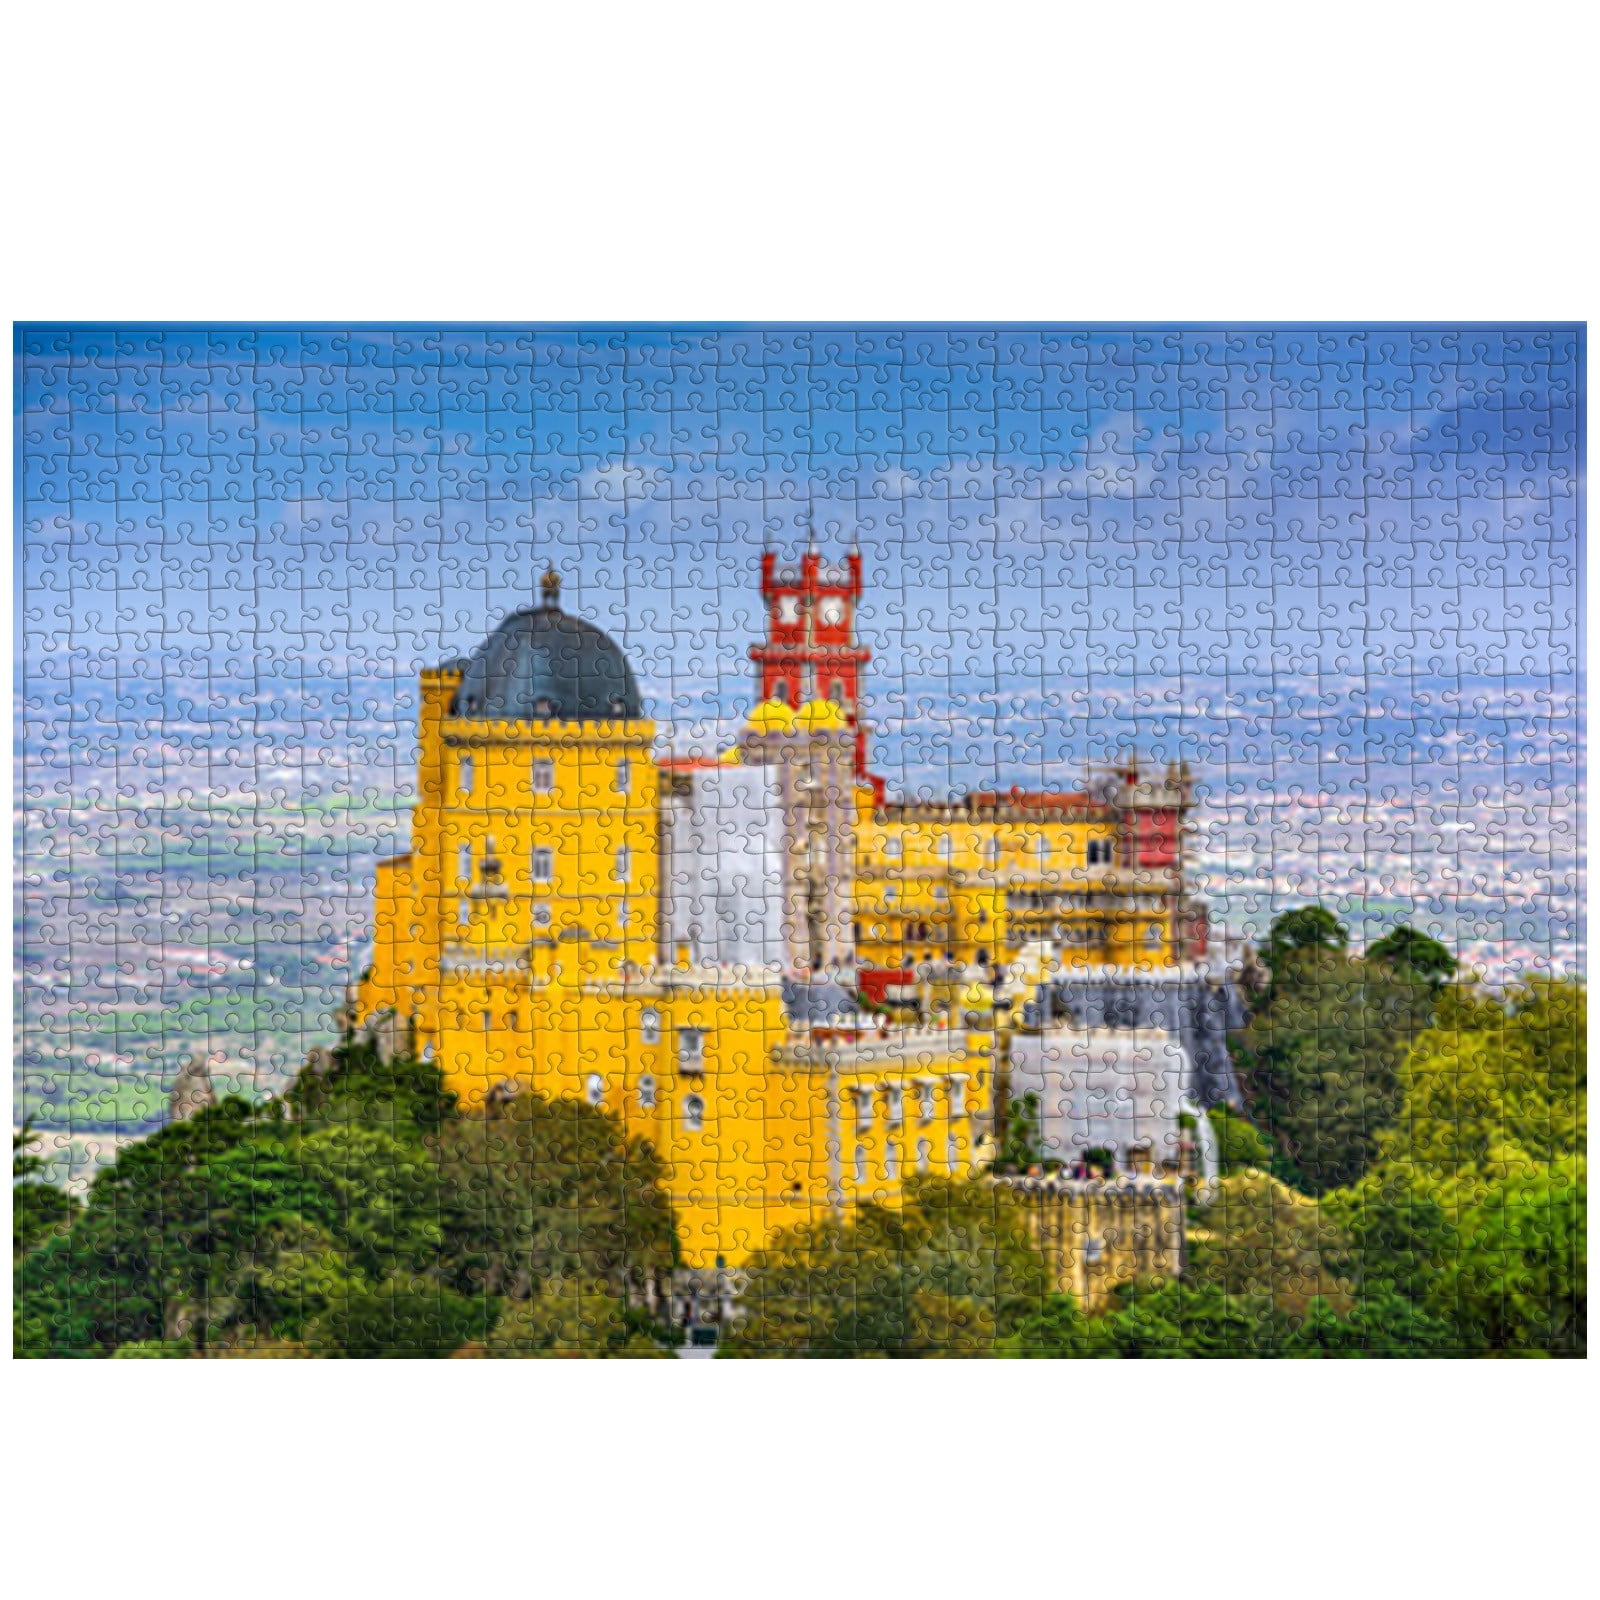 Puzzles for Adults 5000 Piece Jigsaw pig-5000 Adult Puzzle 5000 or Jigsaw Puzzle Brain IQ Developing Magical Game